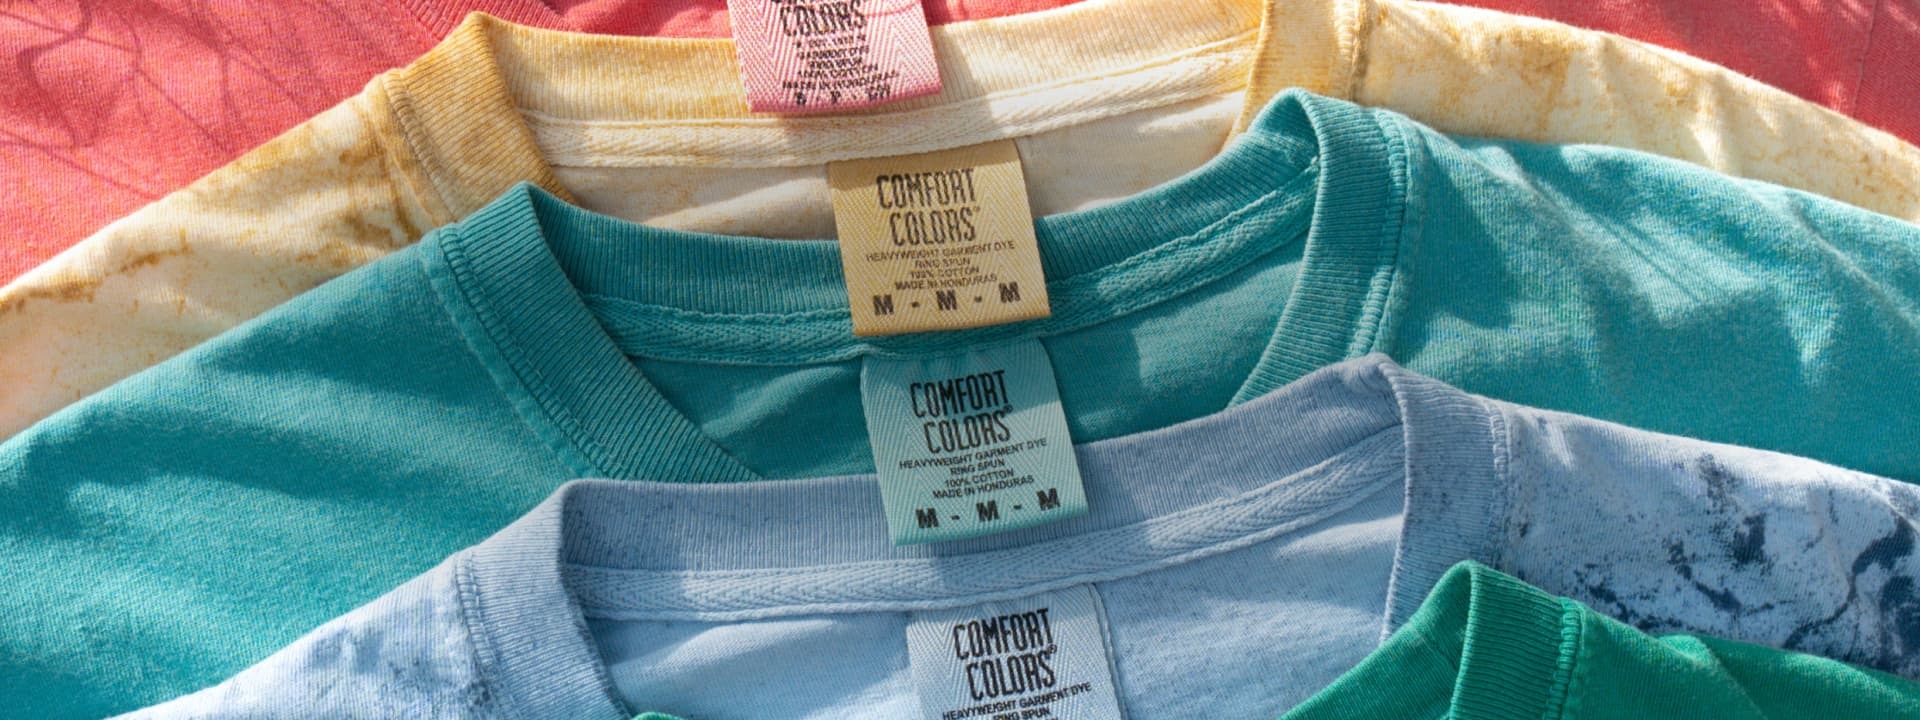 comfort colors heavy weight t-shirts